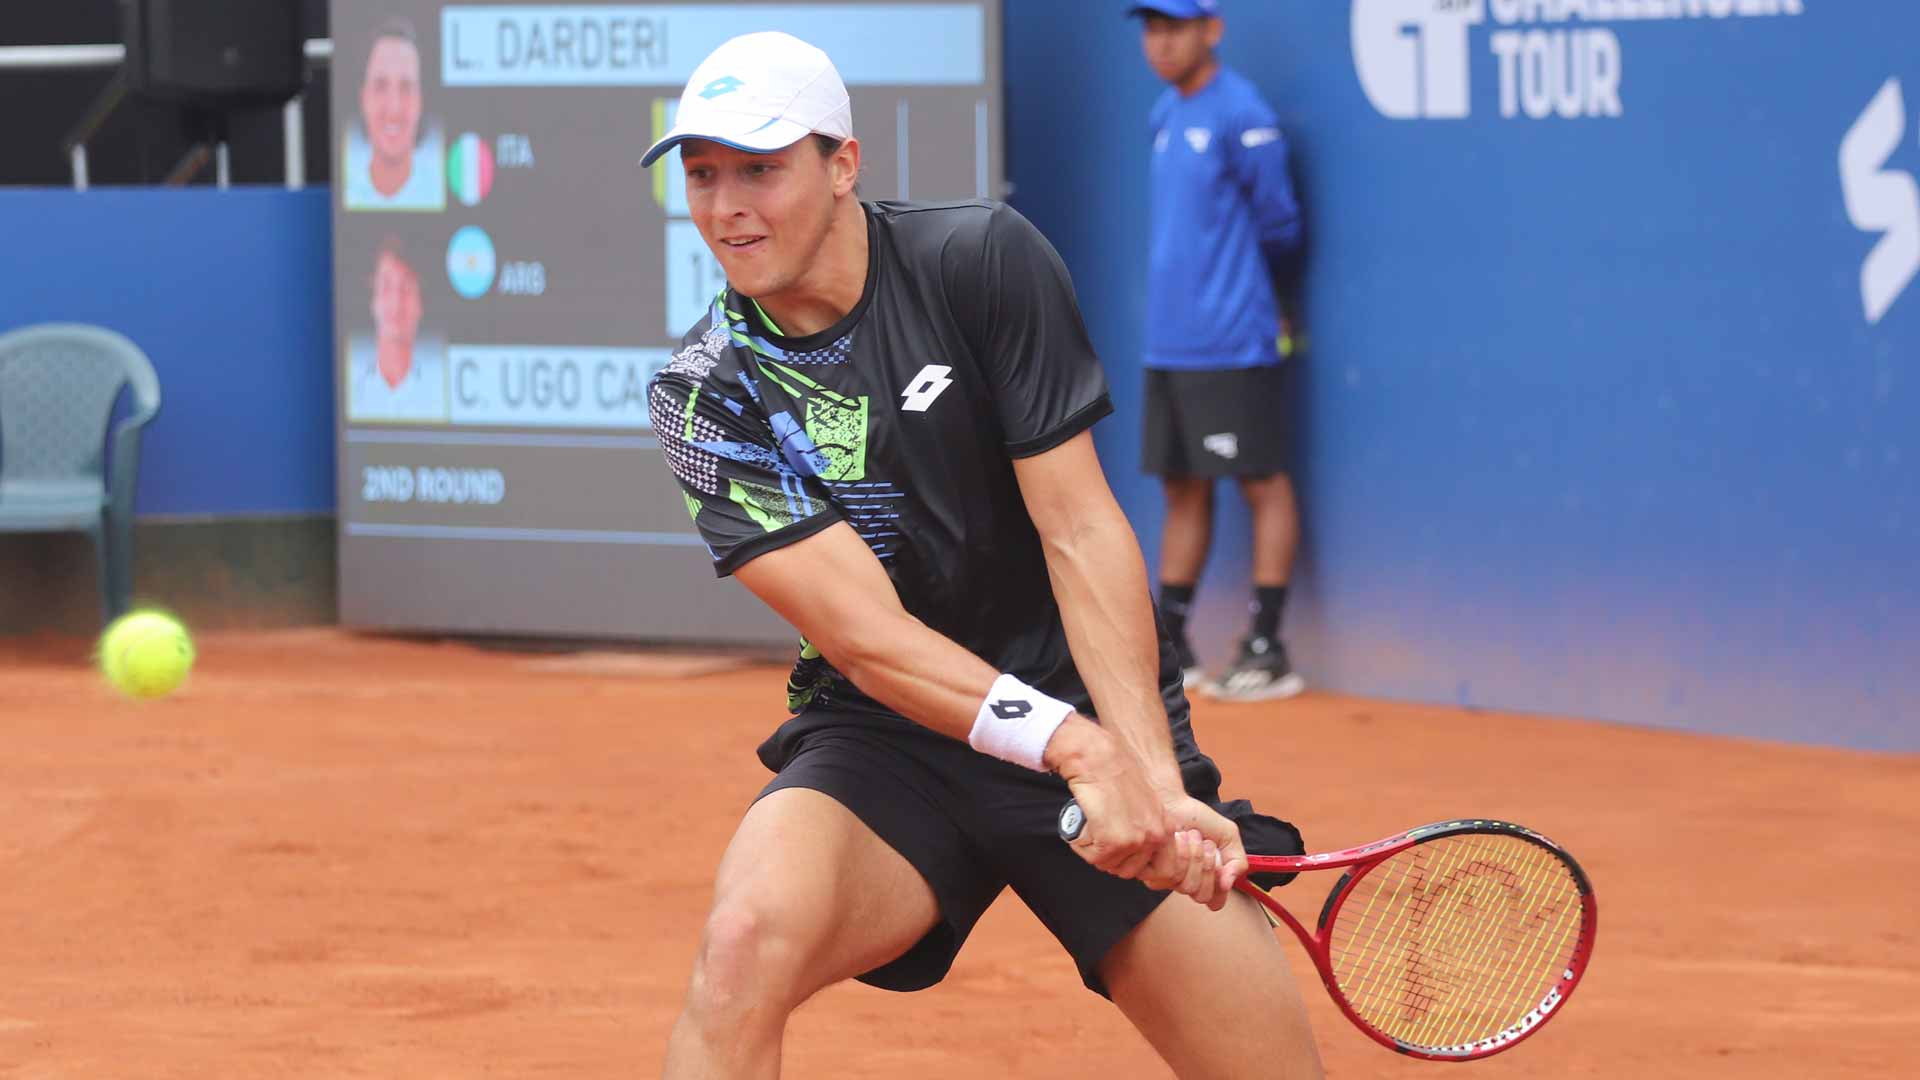 <a href='https://www.atptour.com/en/players/luciano-darderi/d0fj/overview'>Luciano Darderi</a> in action at the <a href='https://www.atptour.com/en/scores/archive/lima/6579/2023/results'>Directv Open Lima</a>, where he won his second ATP Challenger Tour title.